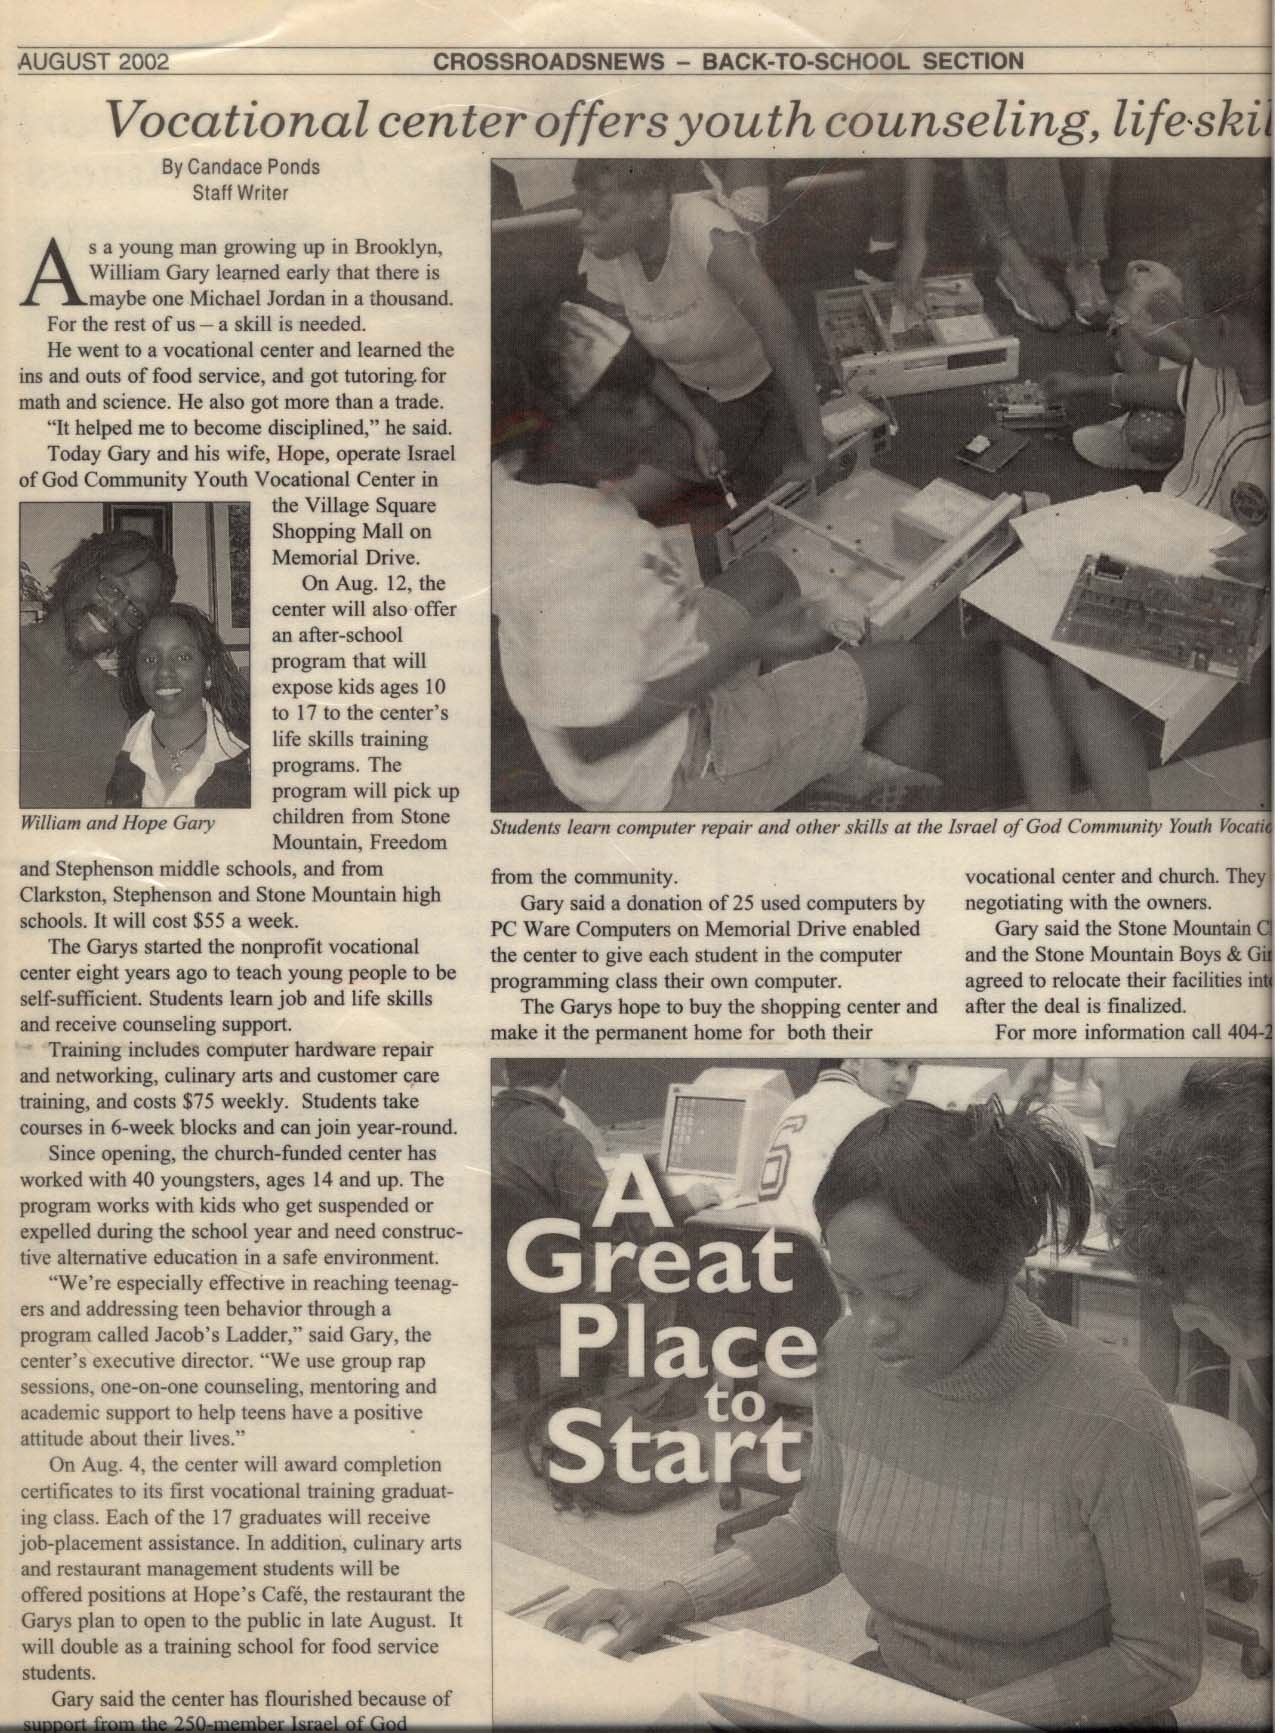 Article - August 2002